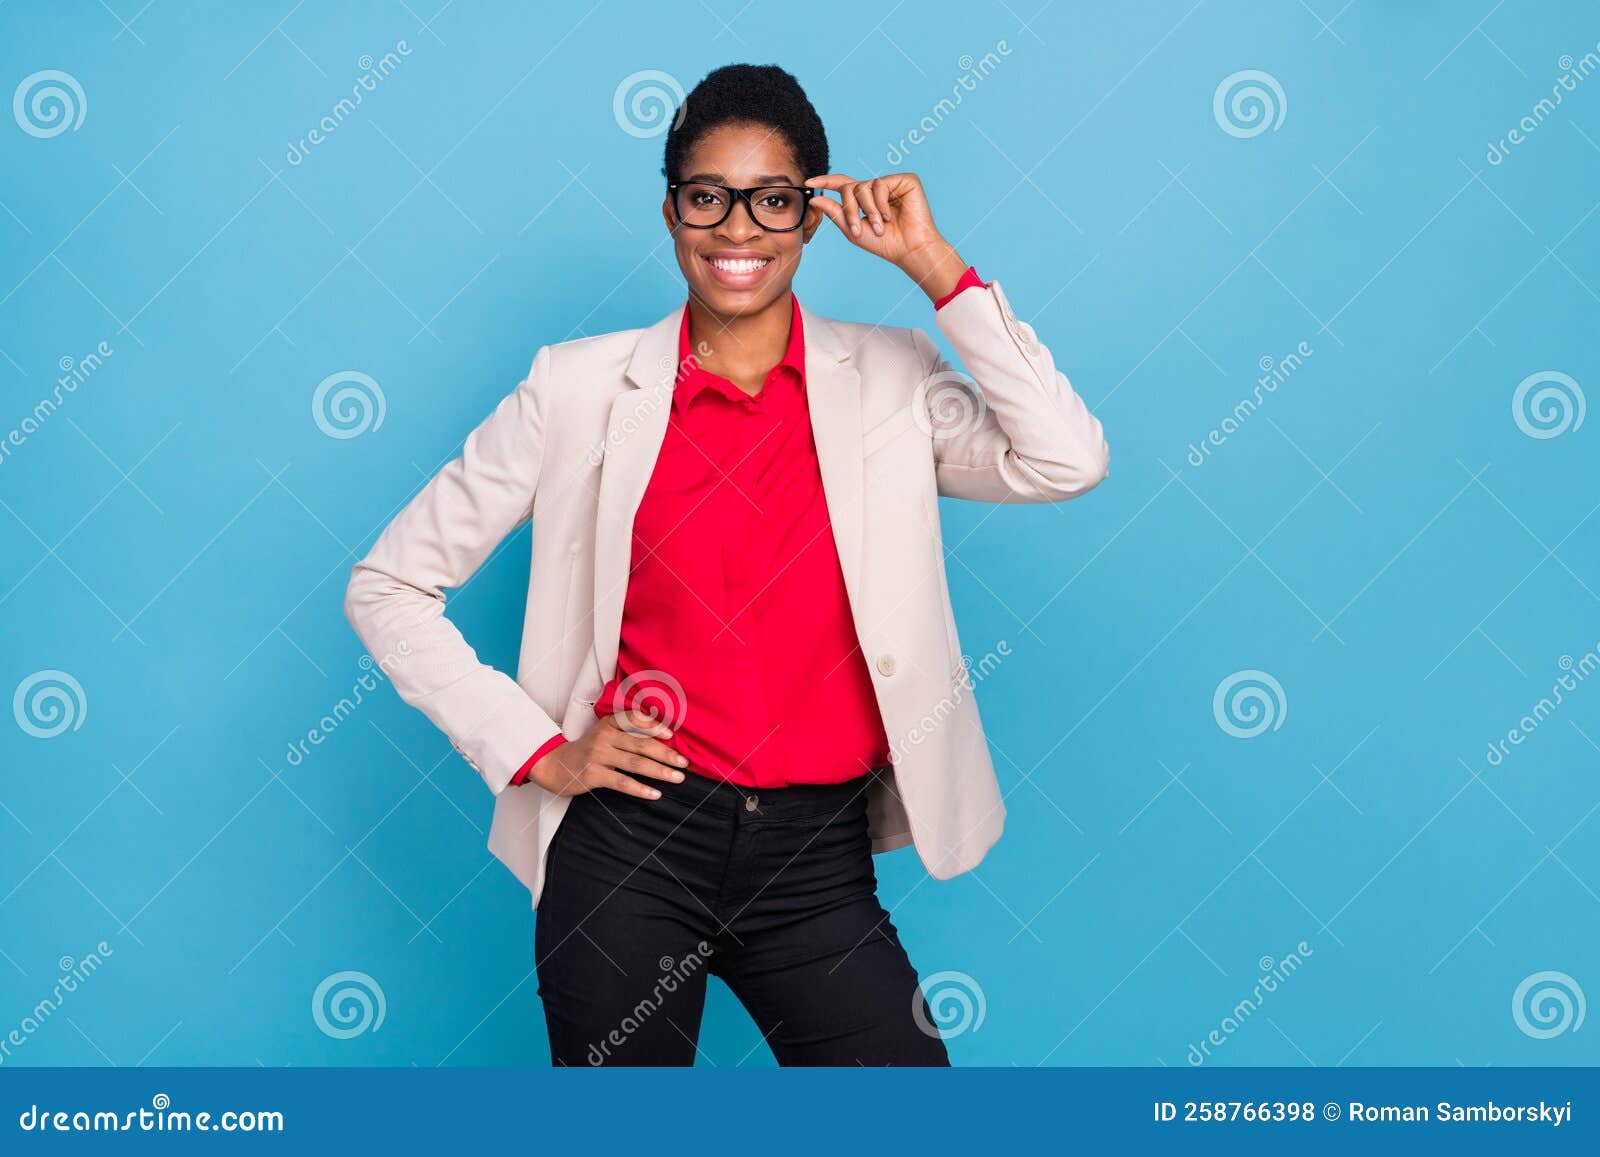 wearing a round glasses. Posing confident